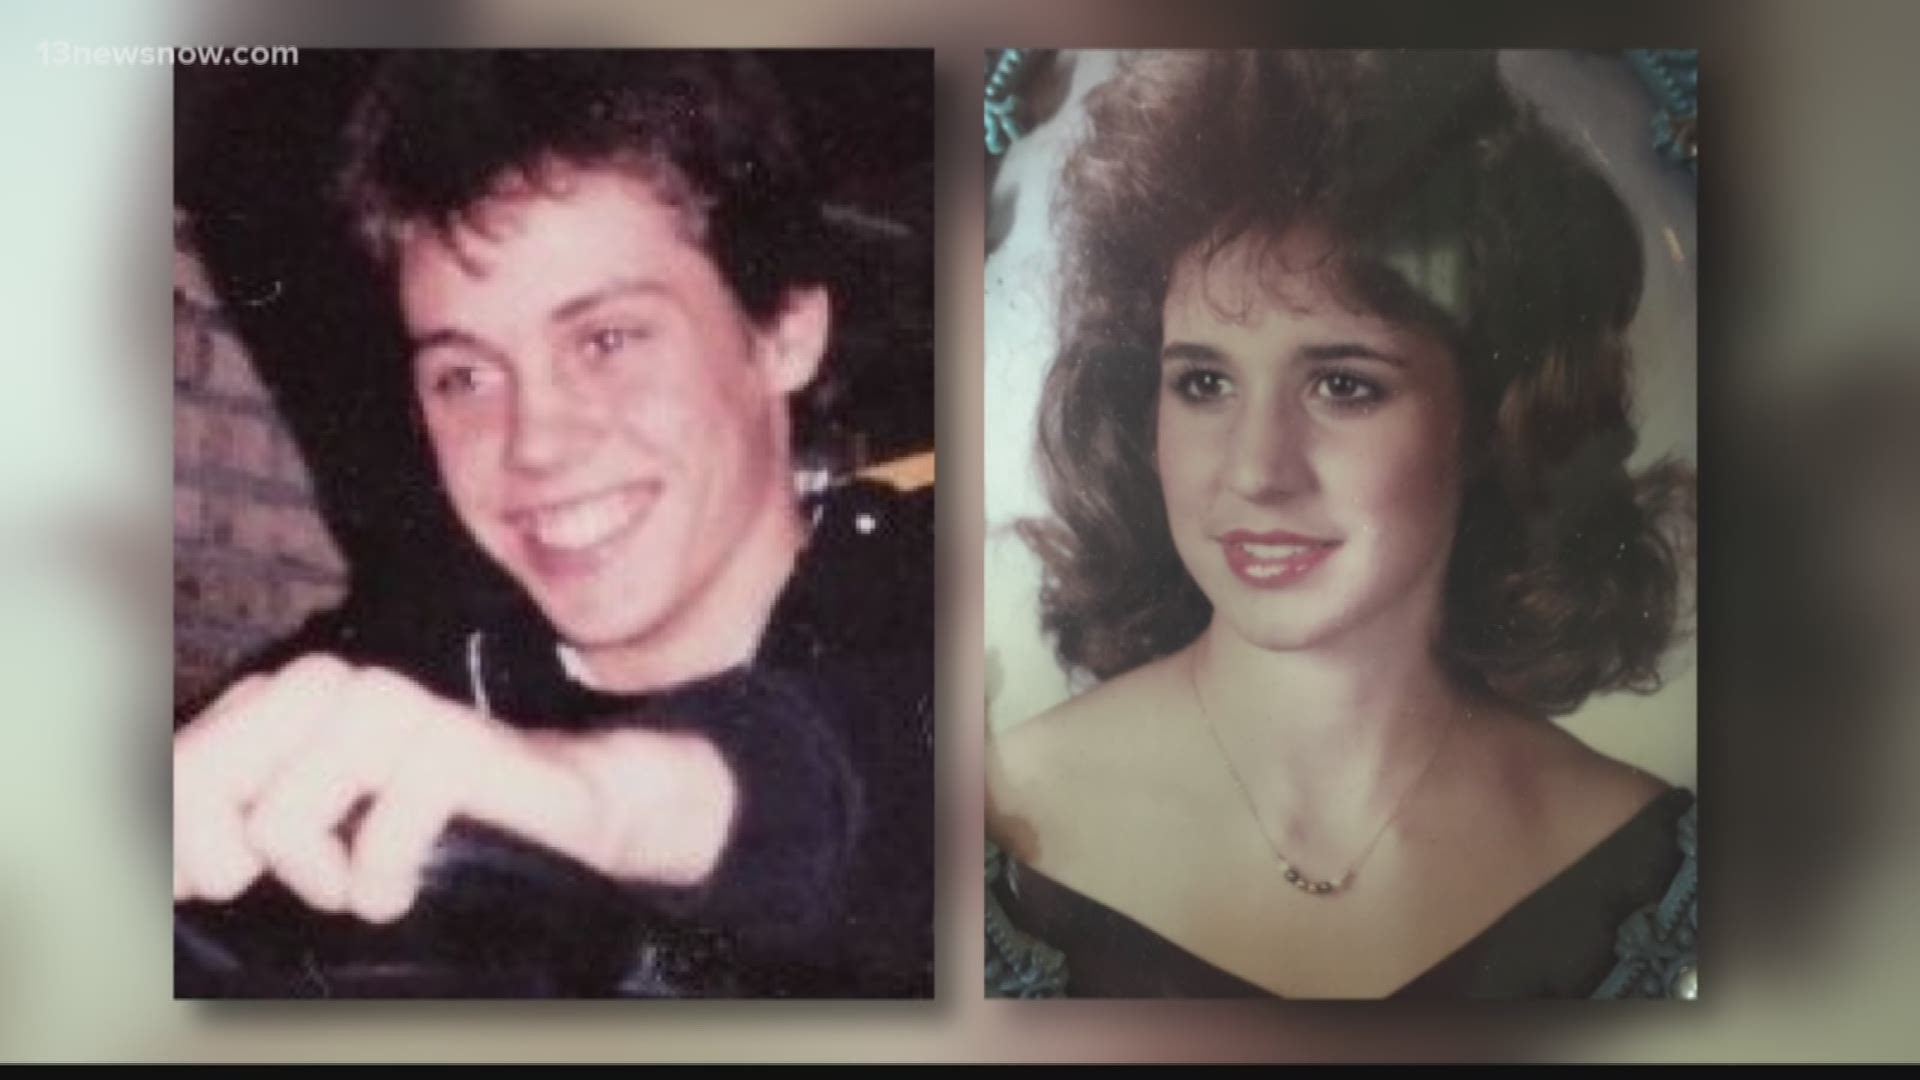 Tuesday marks 30 years since police started looking for Keith Call and Cassandra Hailey.